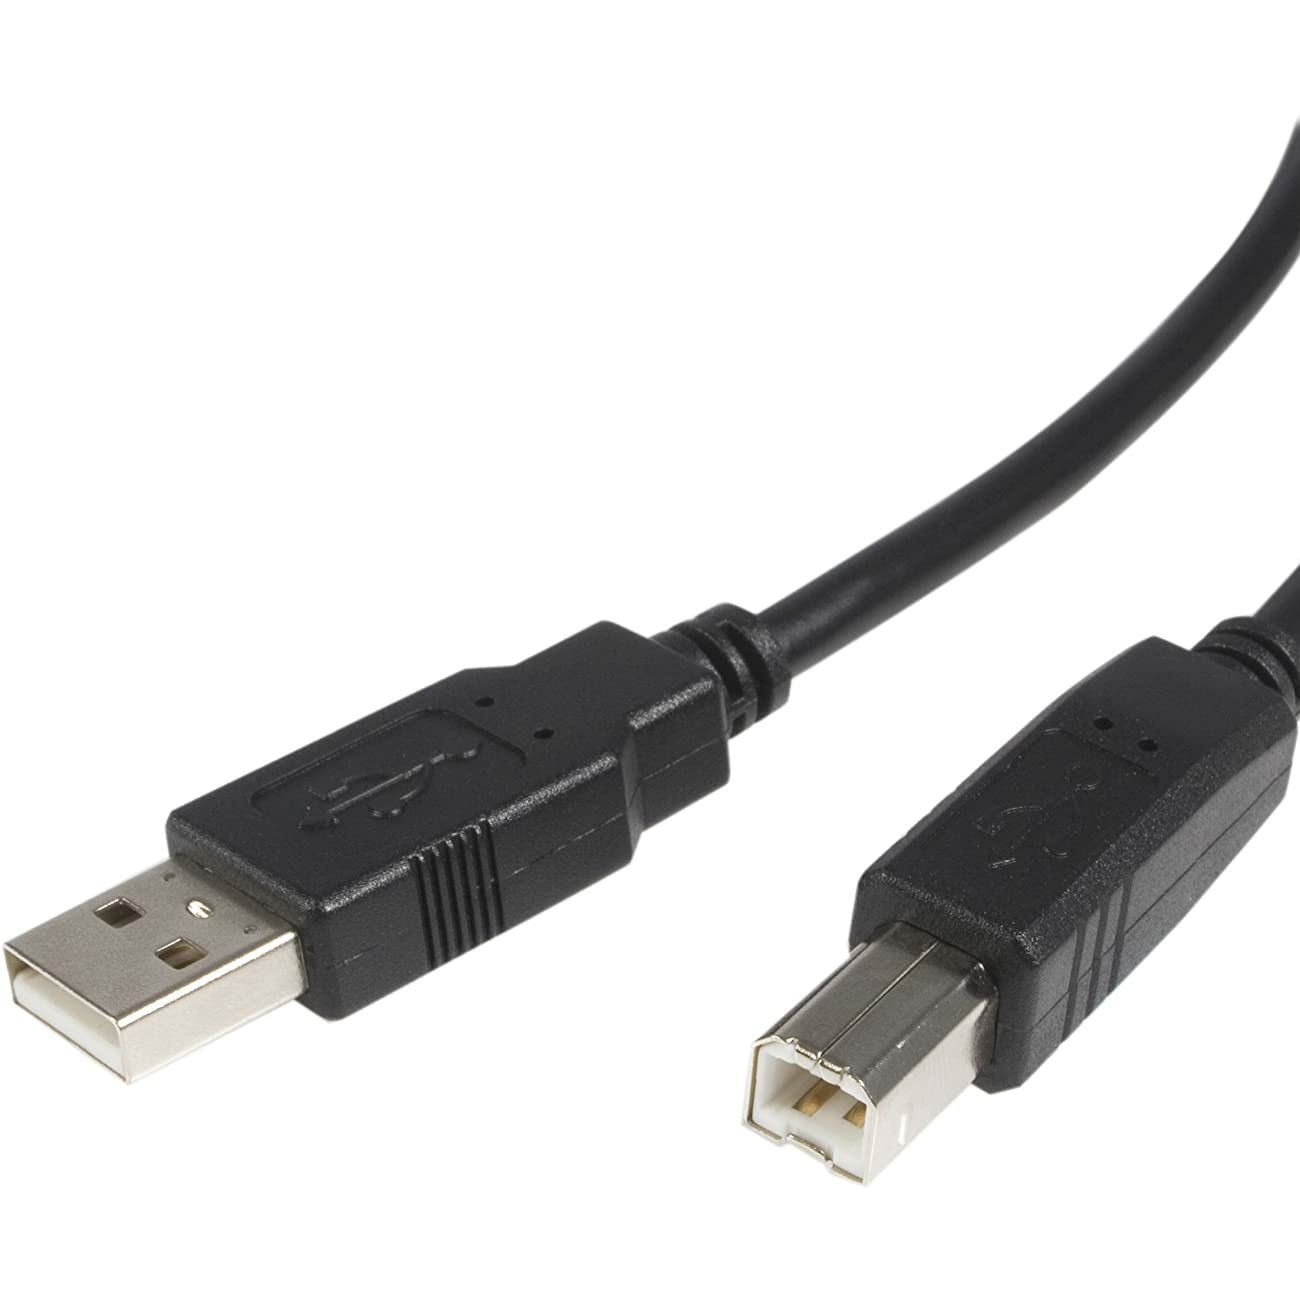 USB 2.0 A Male to B Male Cable 1 Meter Long